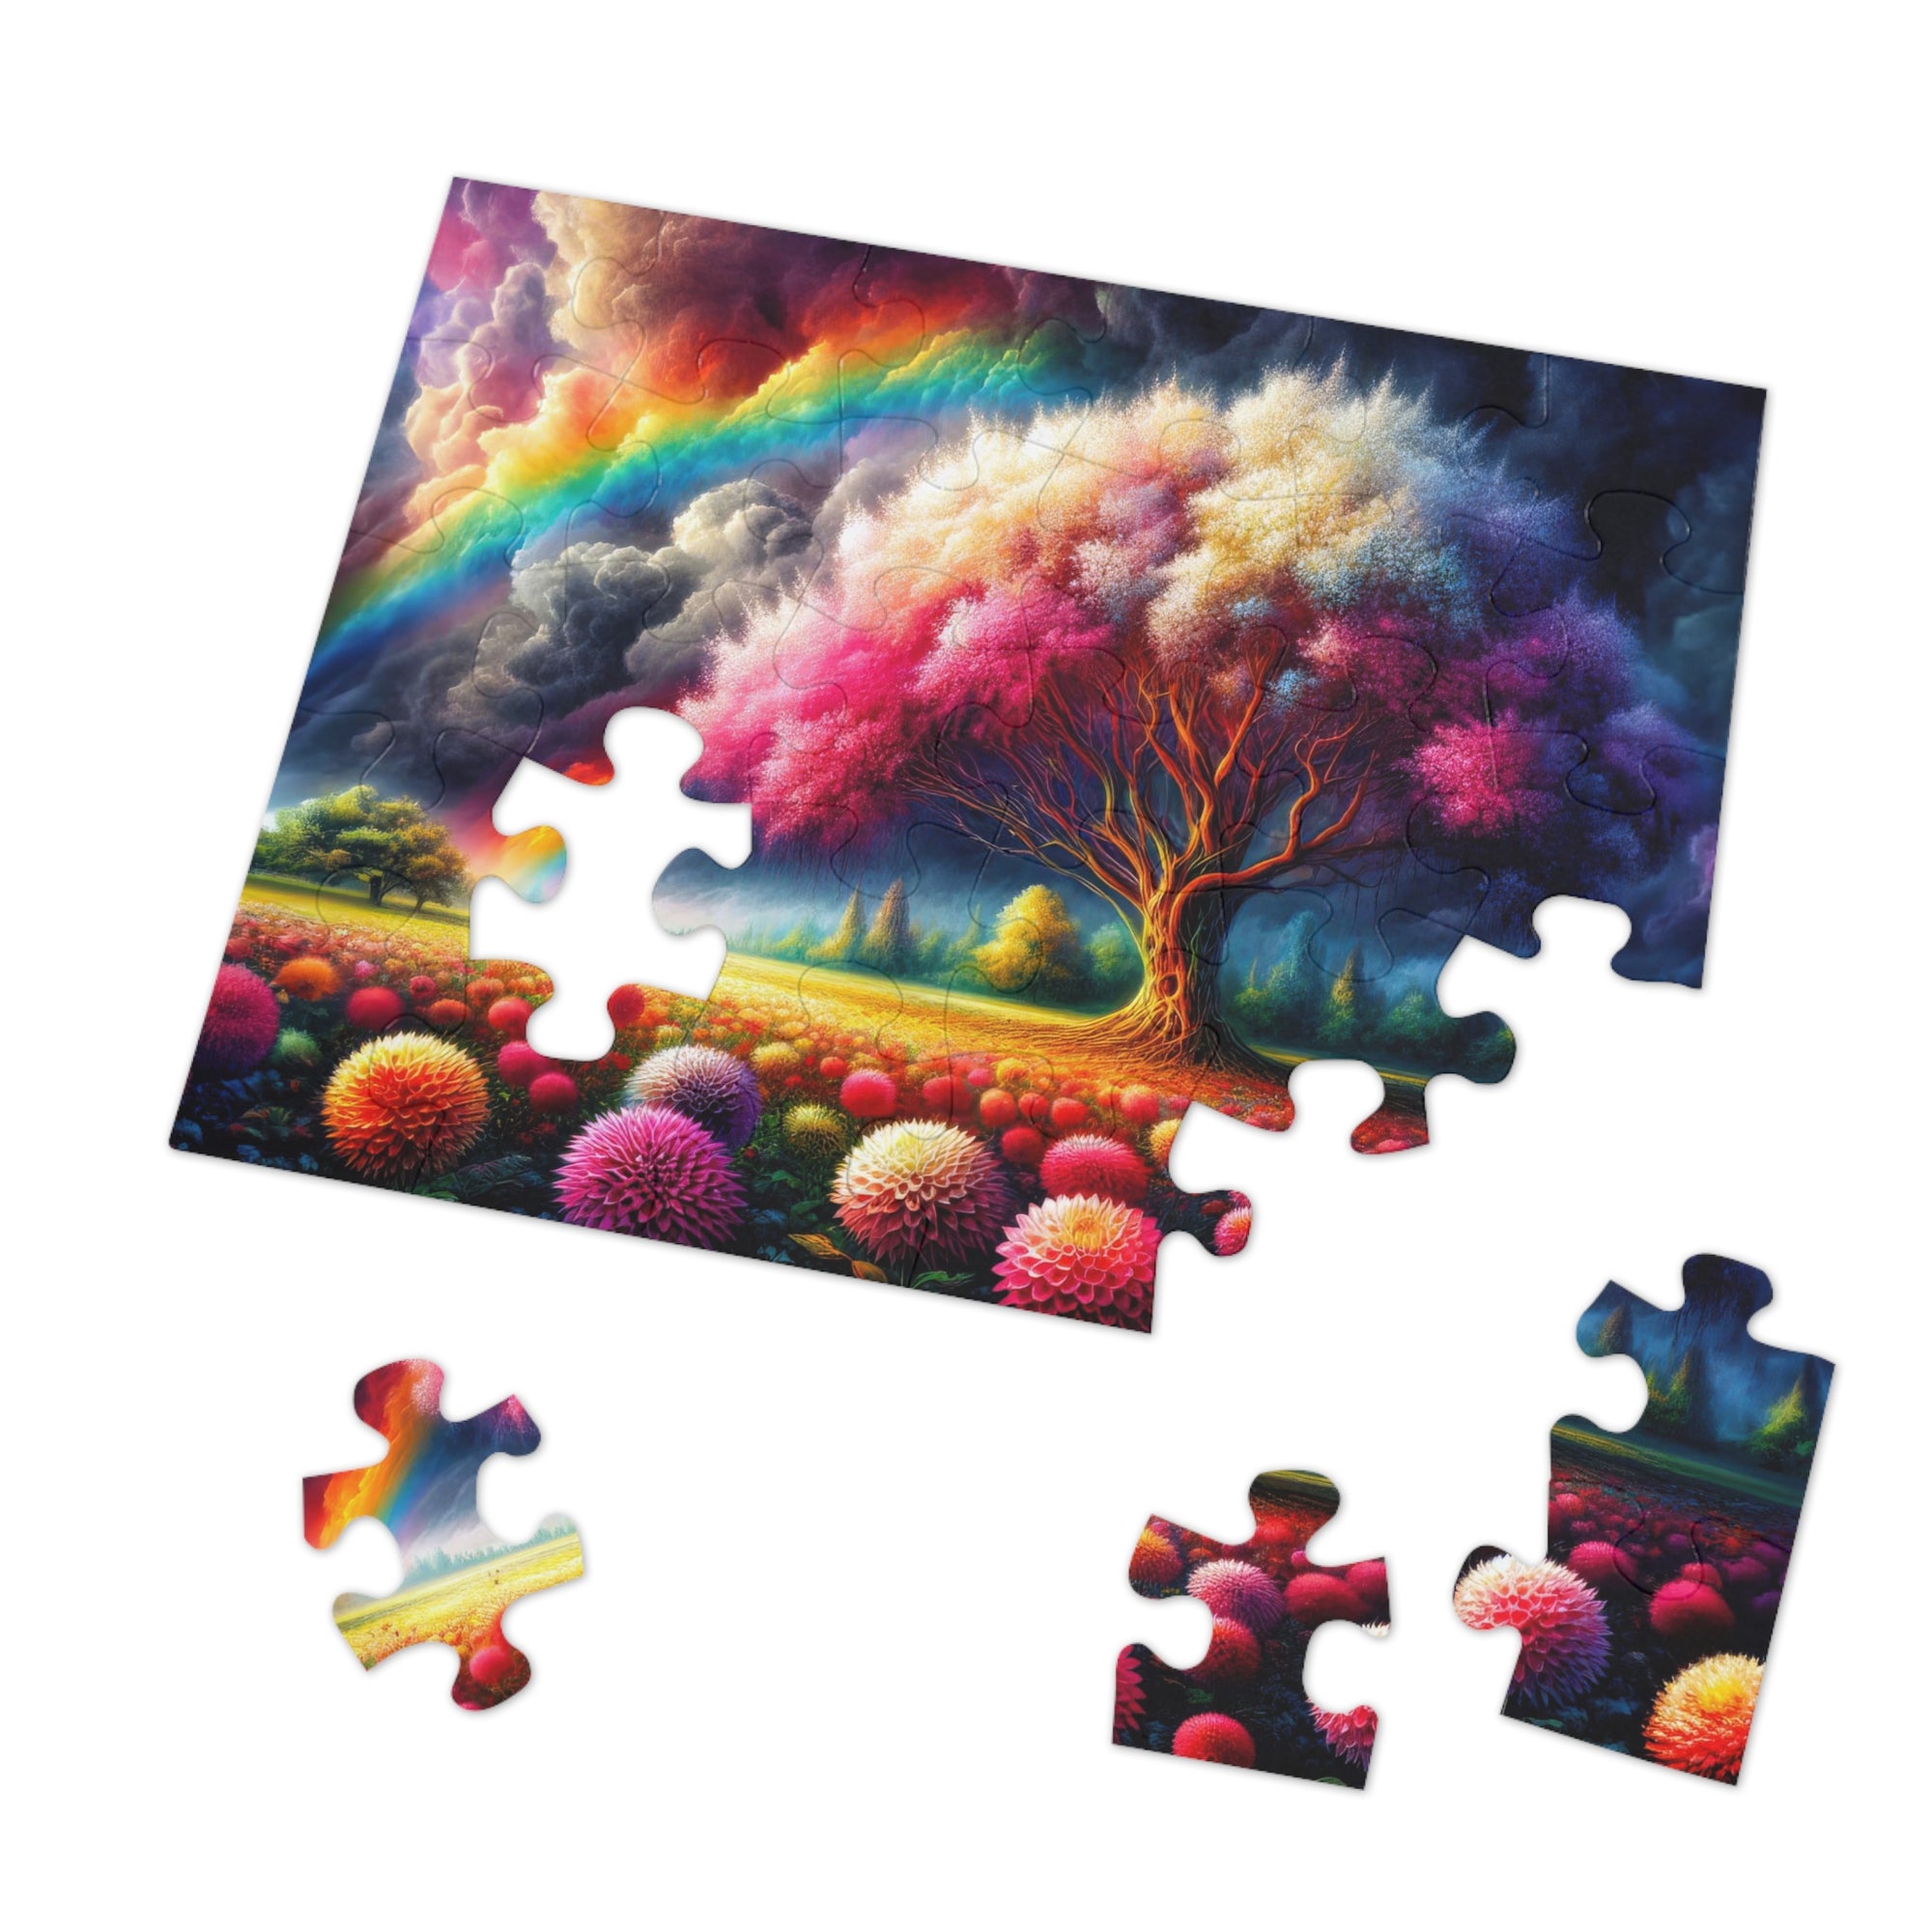 The Blossom of Chromatic Wonders Jigsaw Puzzle